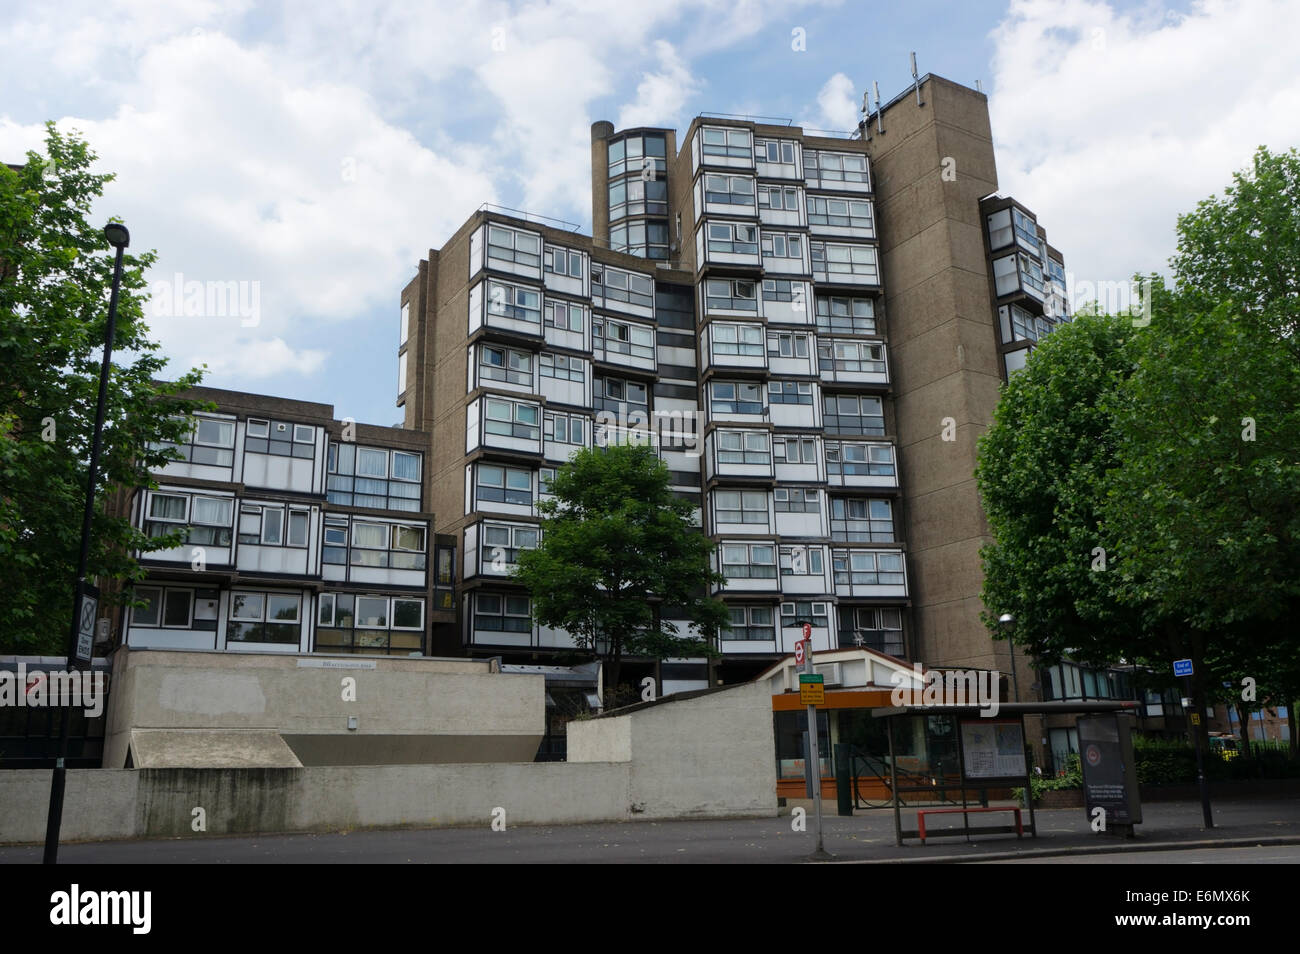 Lambeth Towers, designed by George Finch of Lambeth Architect's Department in 1965. Stock Photo